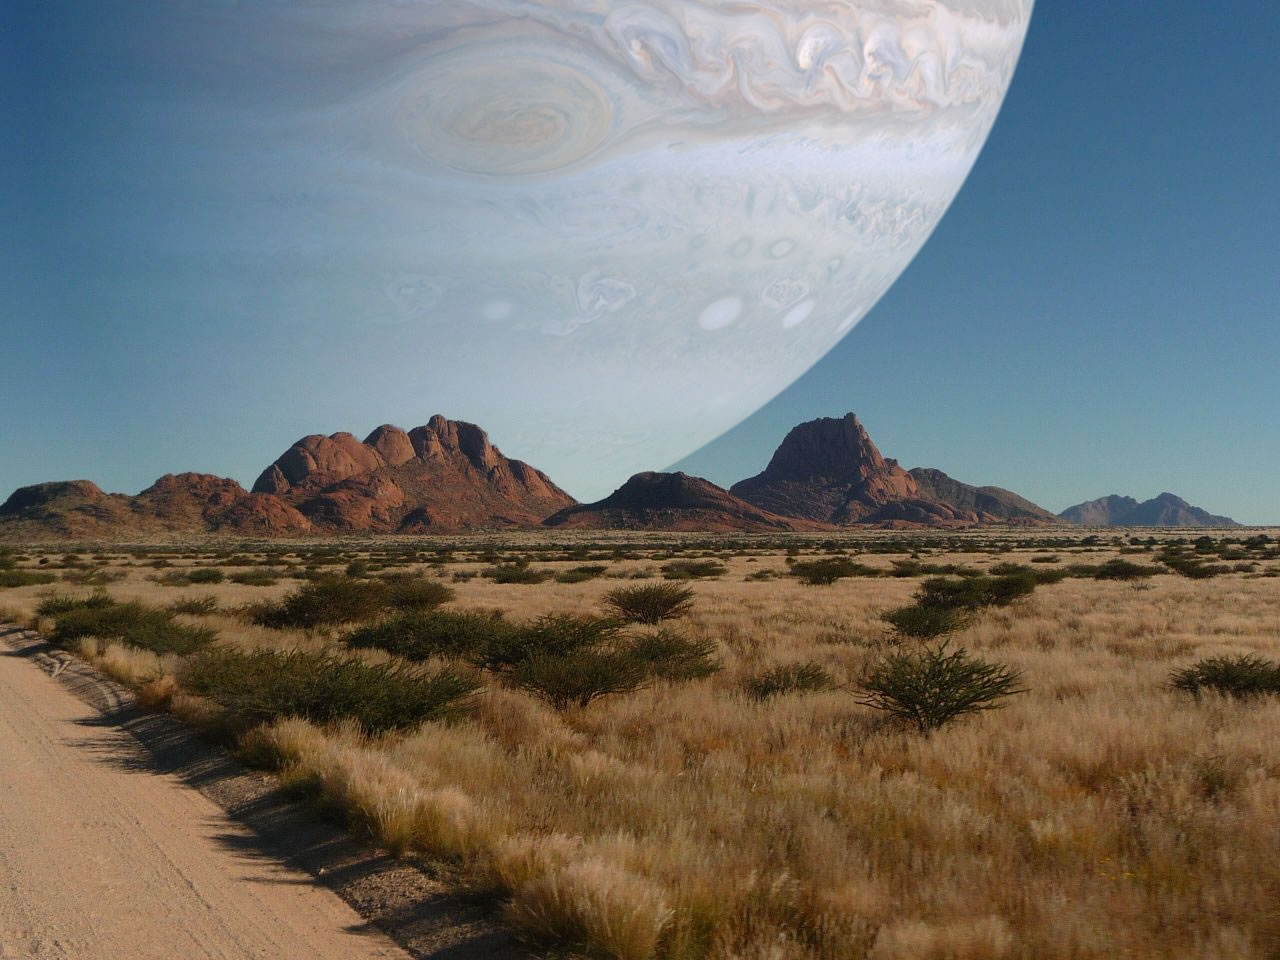 if jupiter was as close as the moon